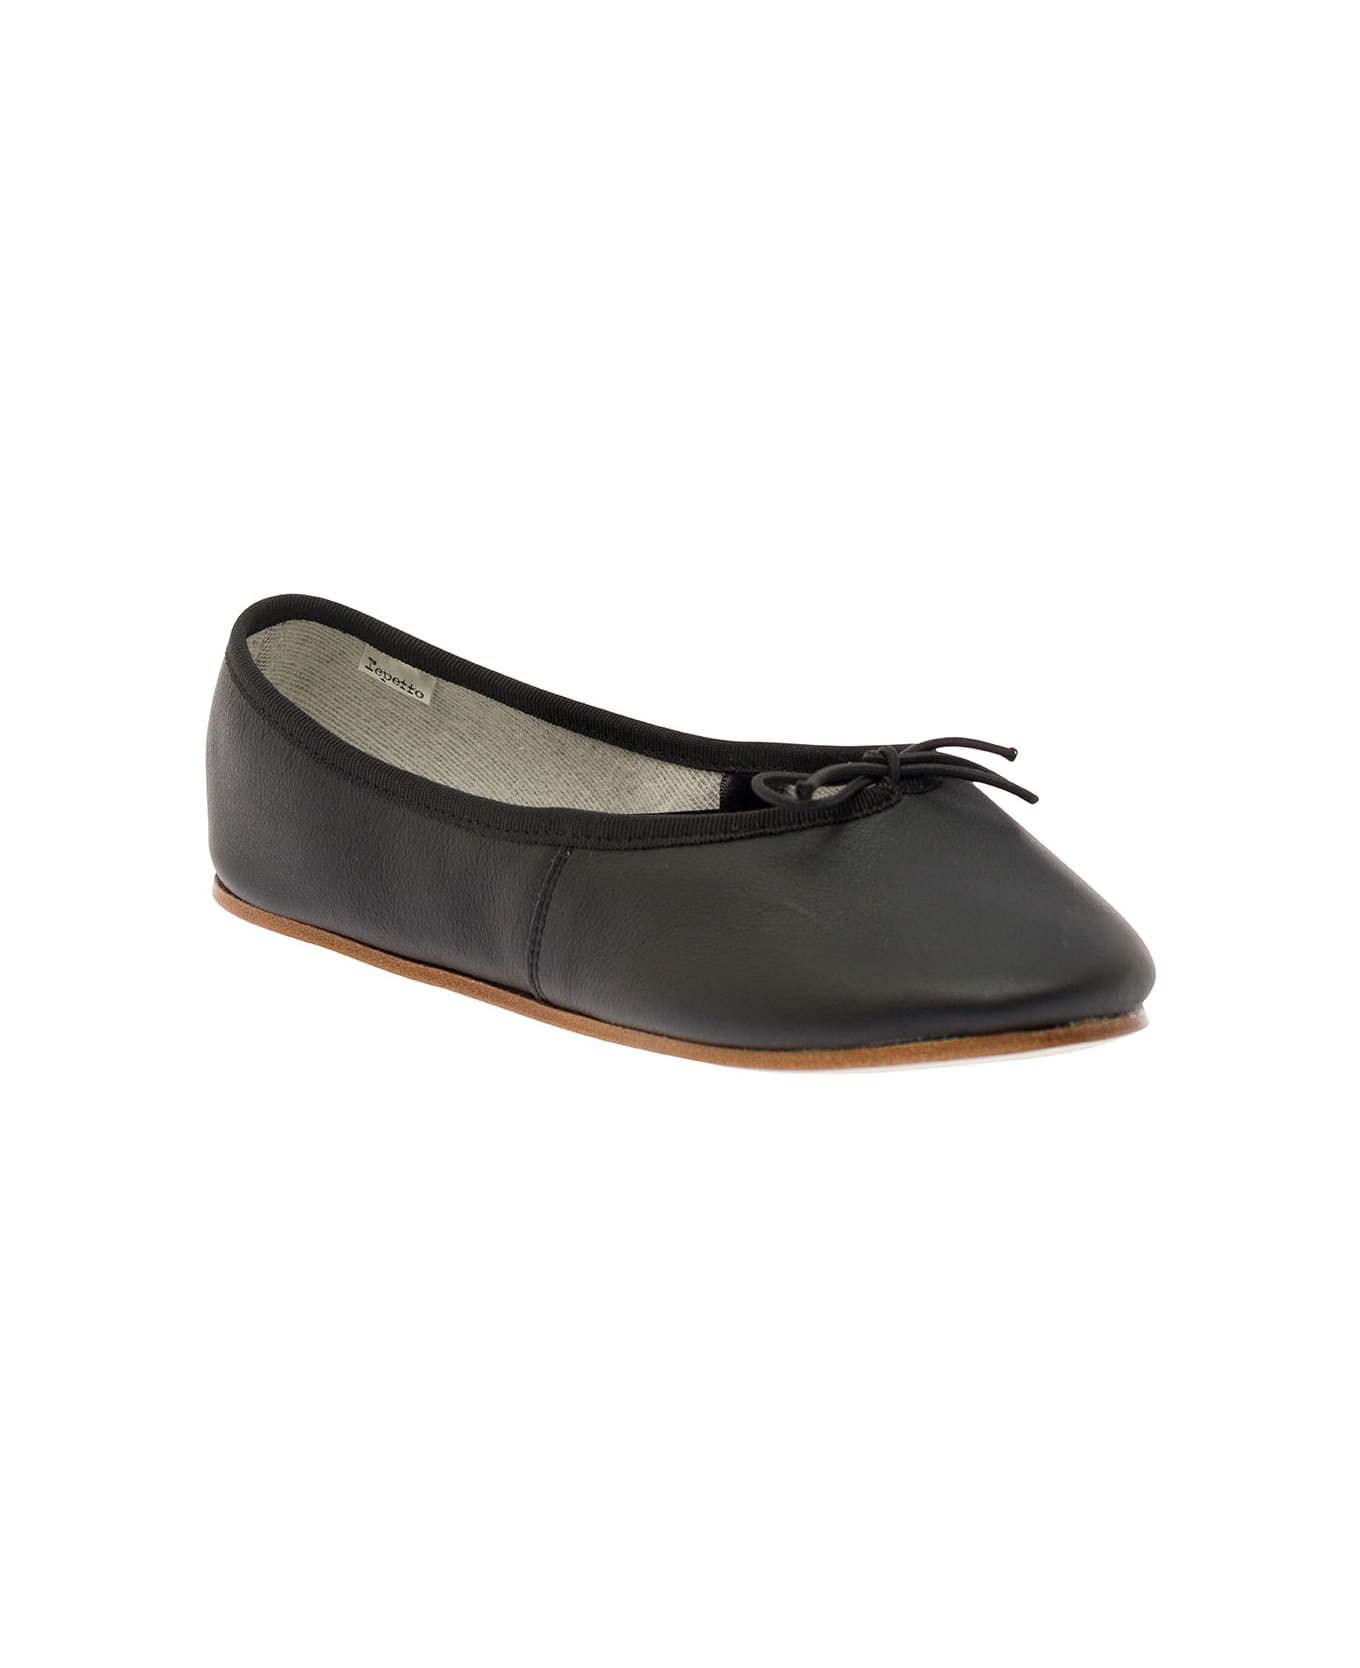 Repetto 'sofia' Black Ballet Flats With Ribbon In Leather Woman - Black フラットシューズ